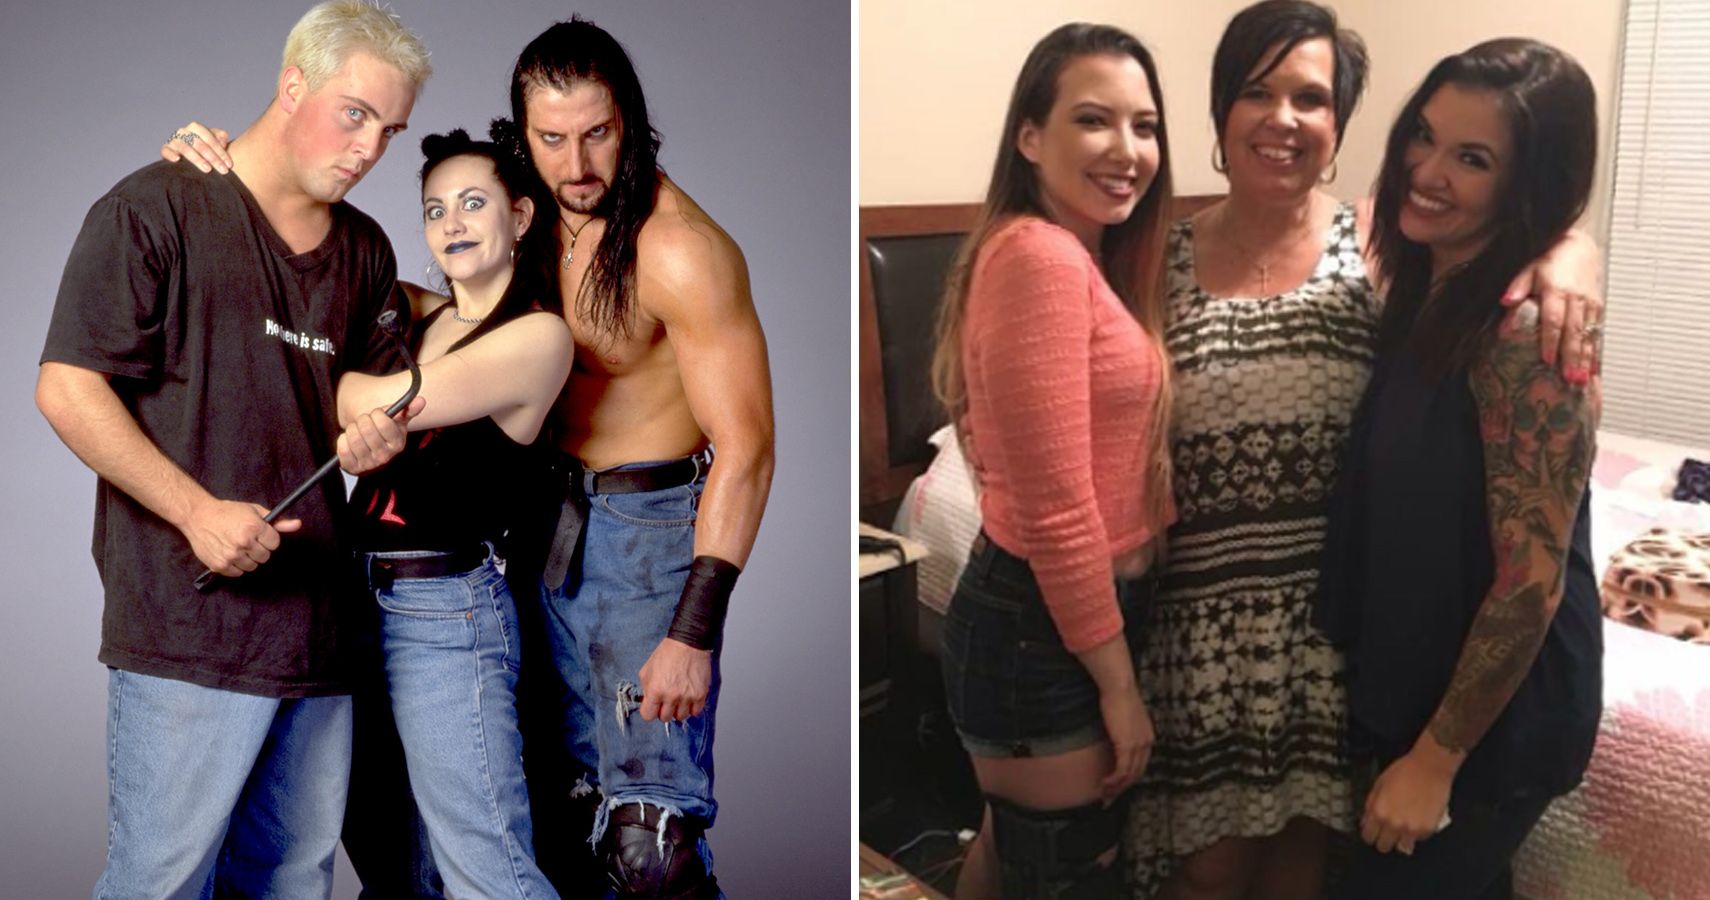 Plenty of second generation wrestlers have come and gone without so much of...